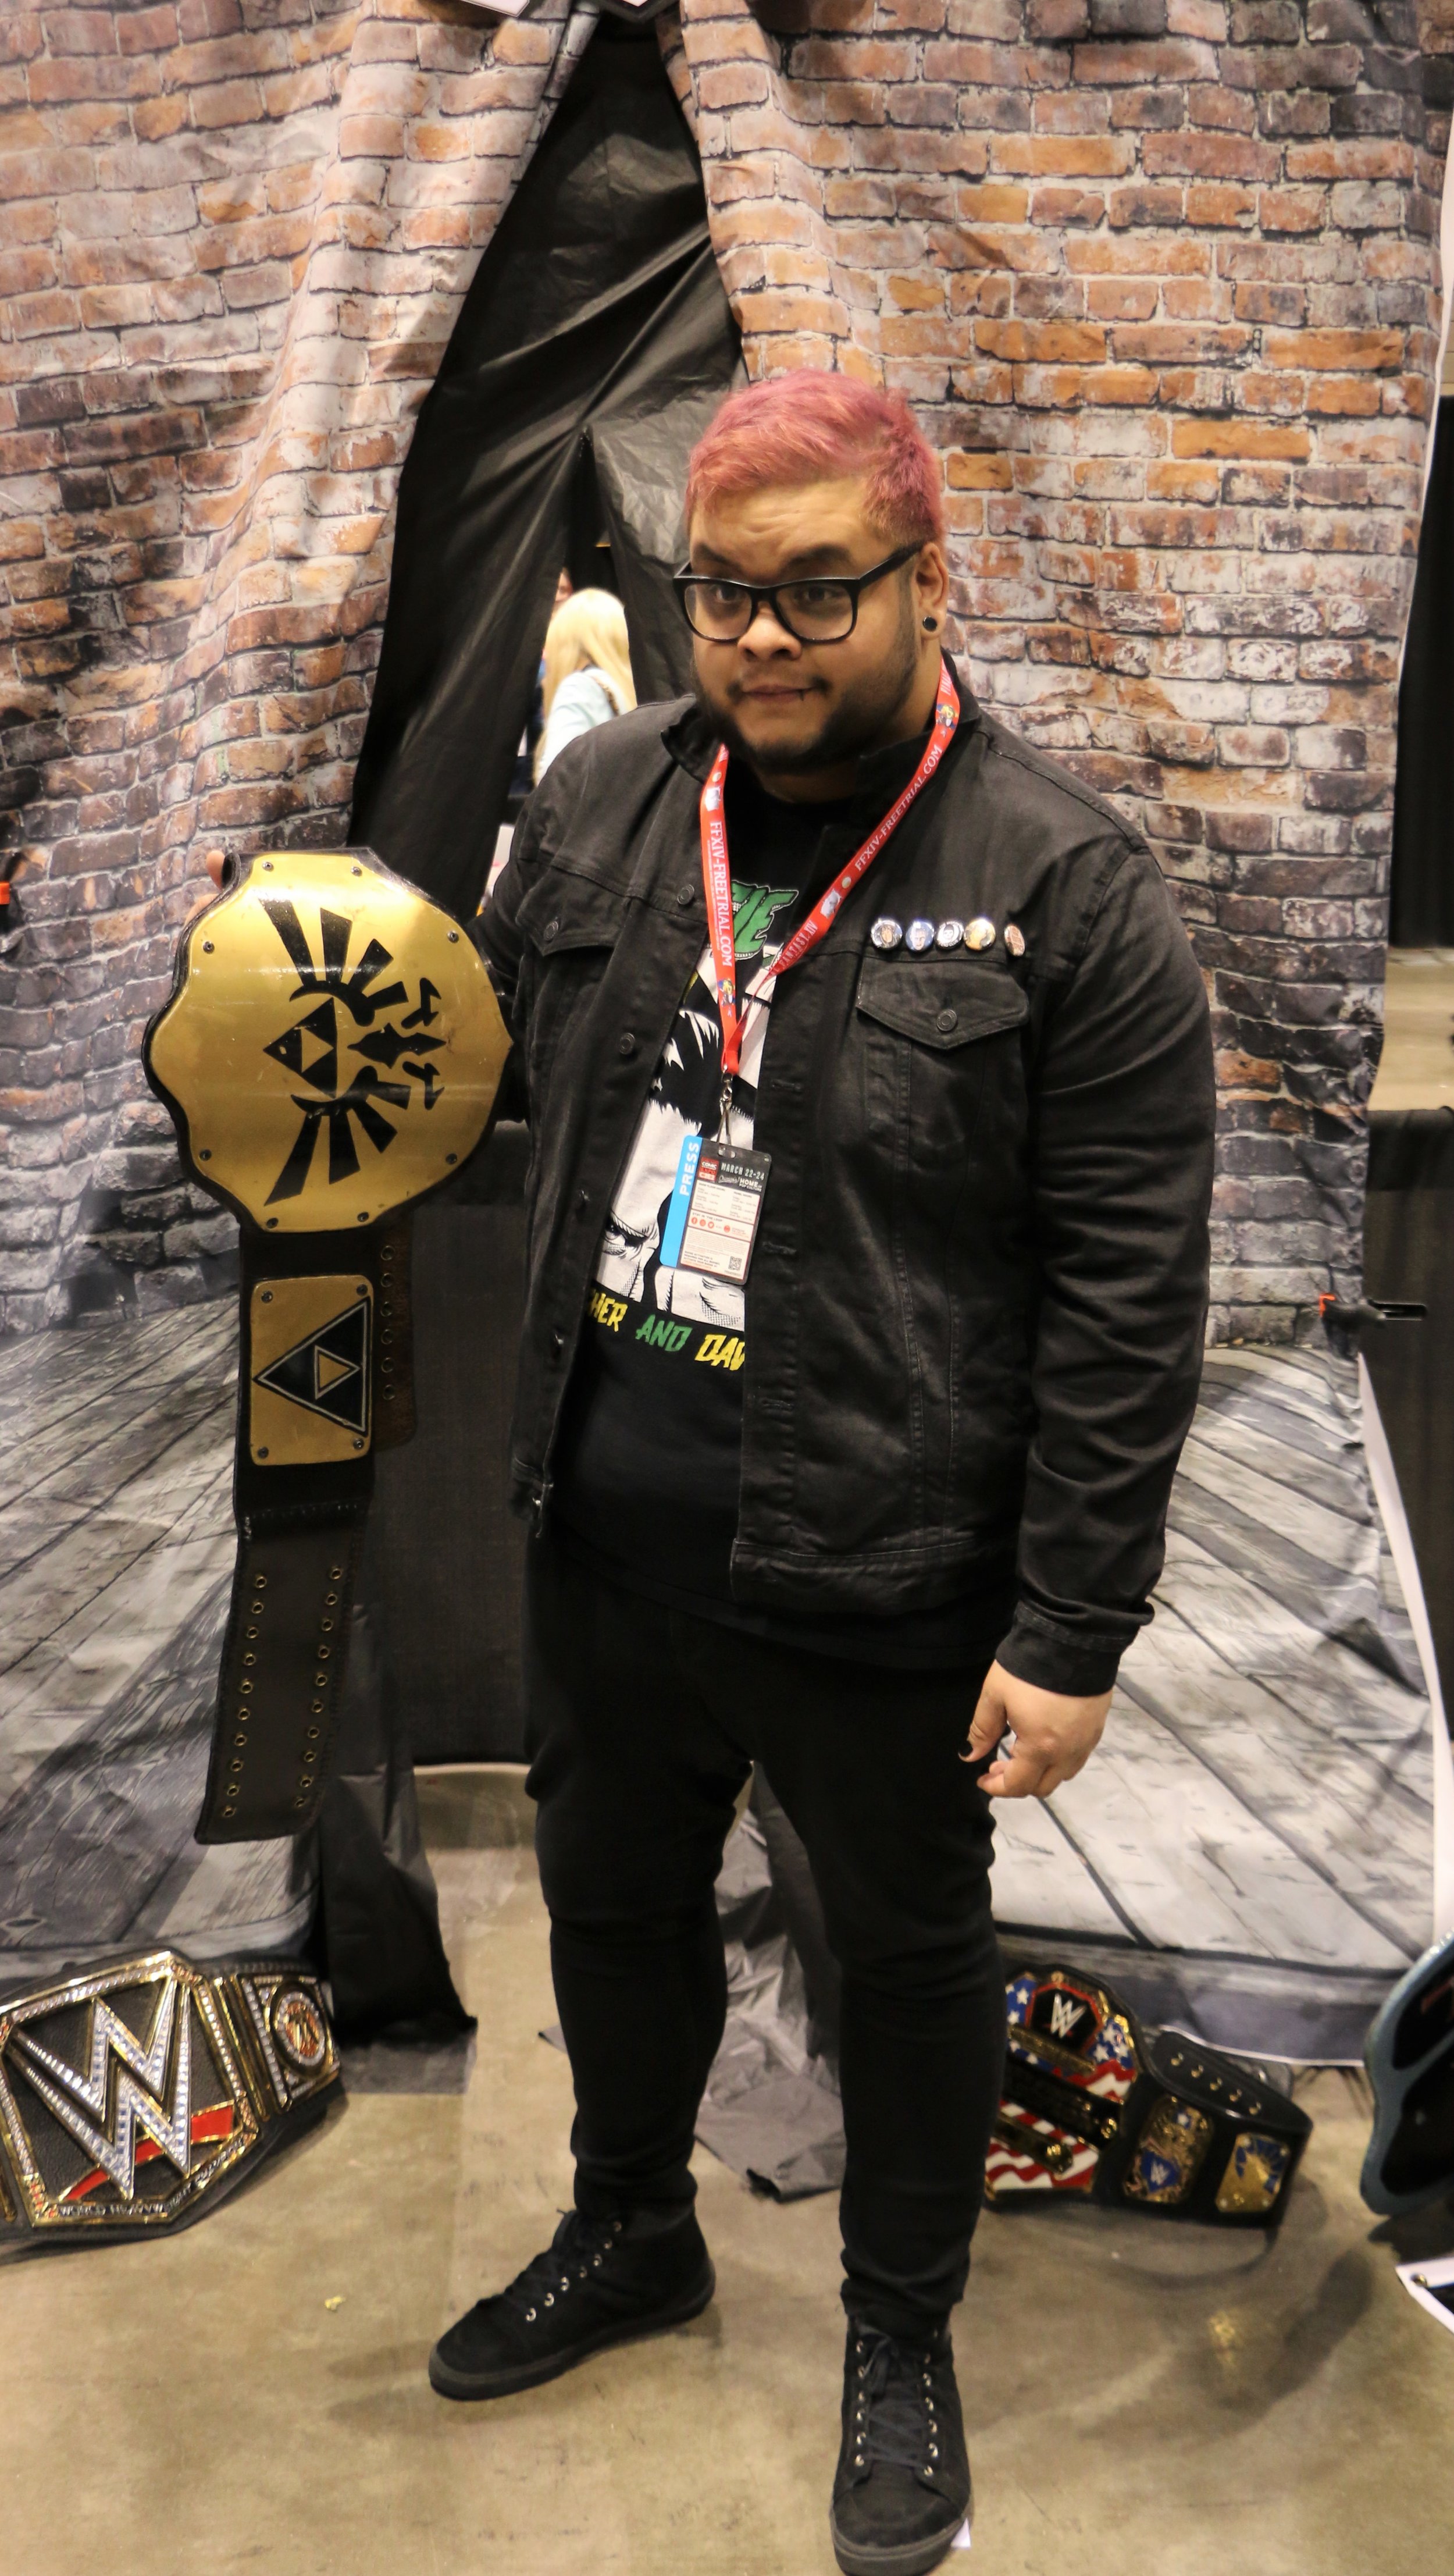  A fan poses with the “Triforce” championship belt at the Too Sweet Cosplay booth. 